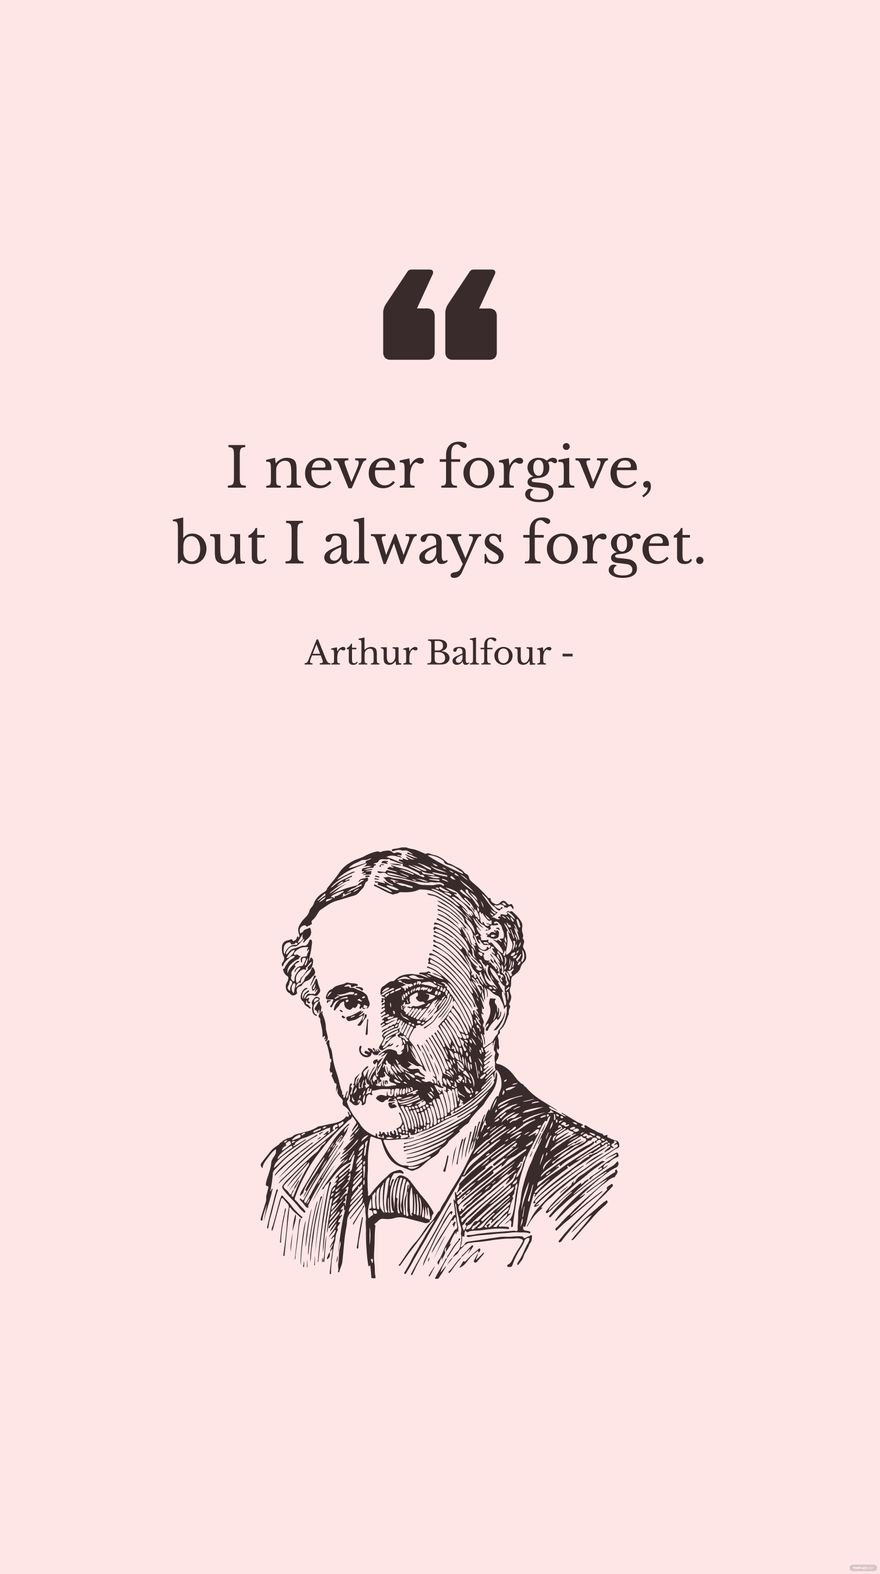 Free Arthur Balfour - I never forgive, but I always forget. in JPG